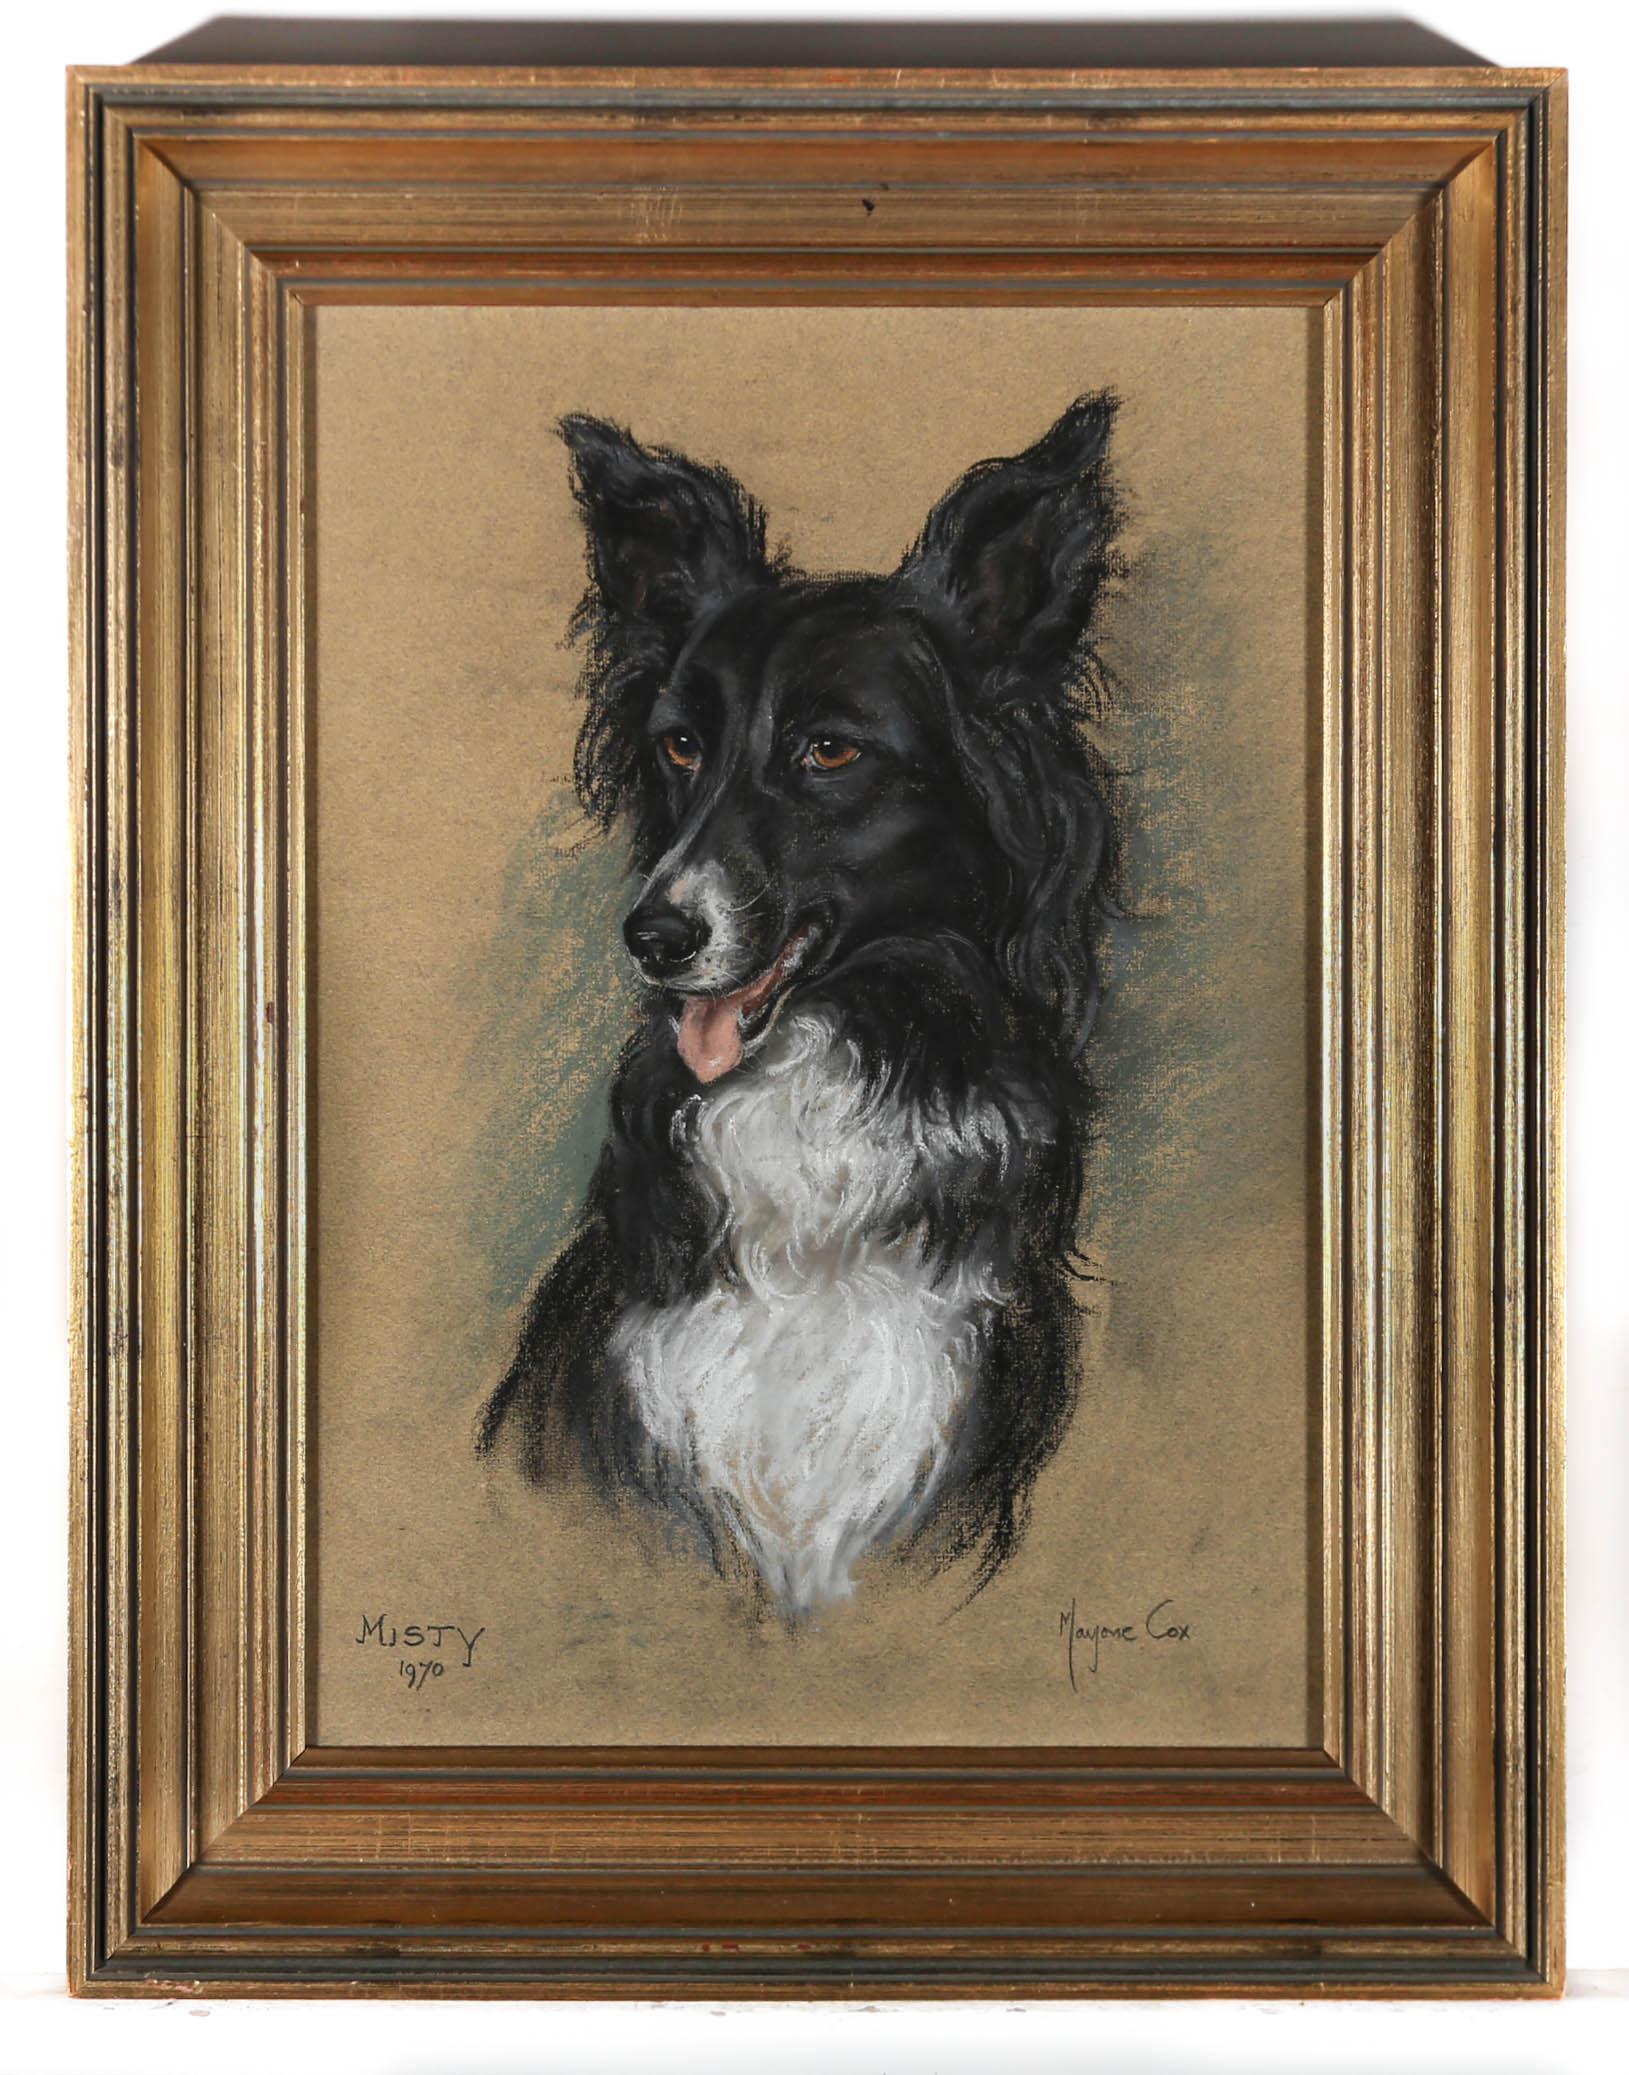 A fine pastel portrait of brown eyed Border Collie Misty, by the well-listed animal portraitist Marjorie Cox (1915-2003). Smartly mounted in a handsome gilt-effect frame with the artist's signature and title inscription to the lower margin. On